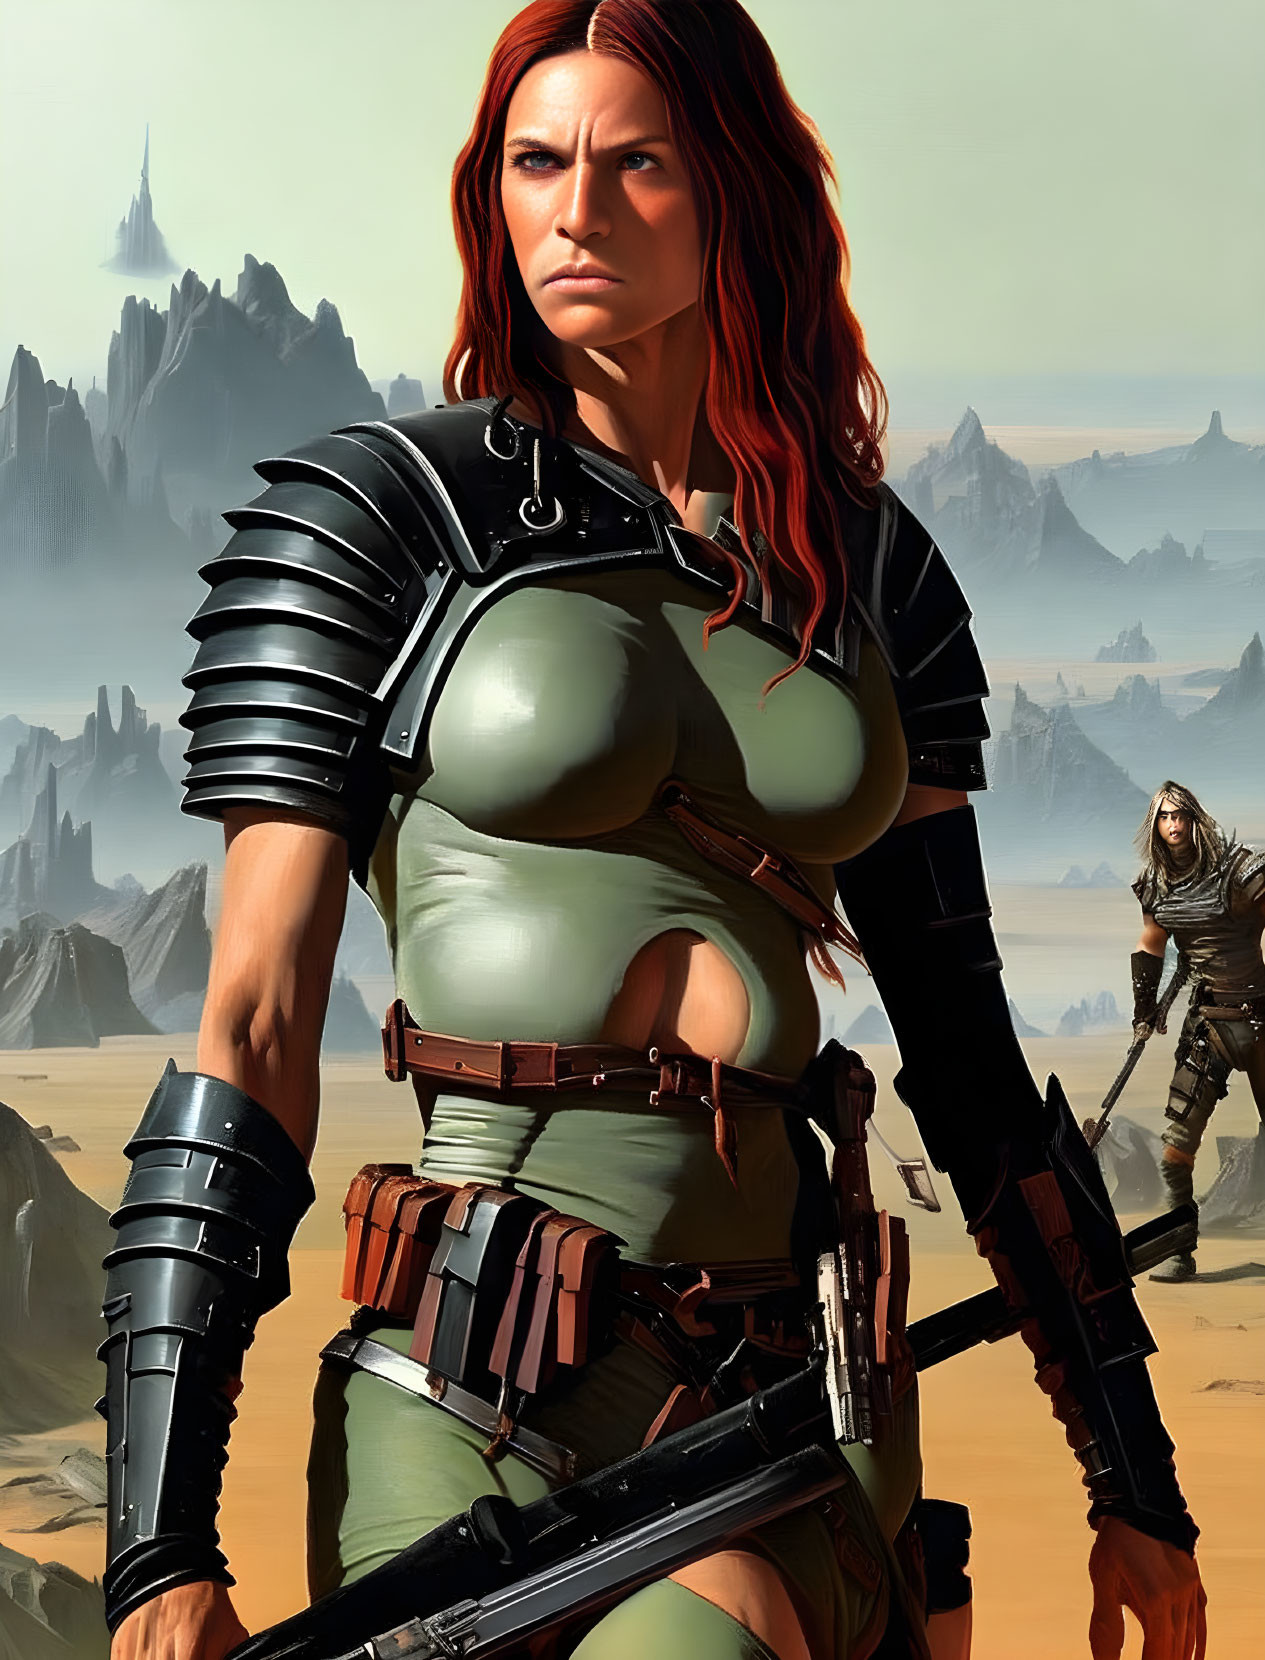 Red-haired female warrior in fantasy armor in desert landscape with figure